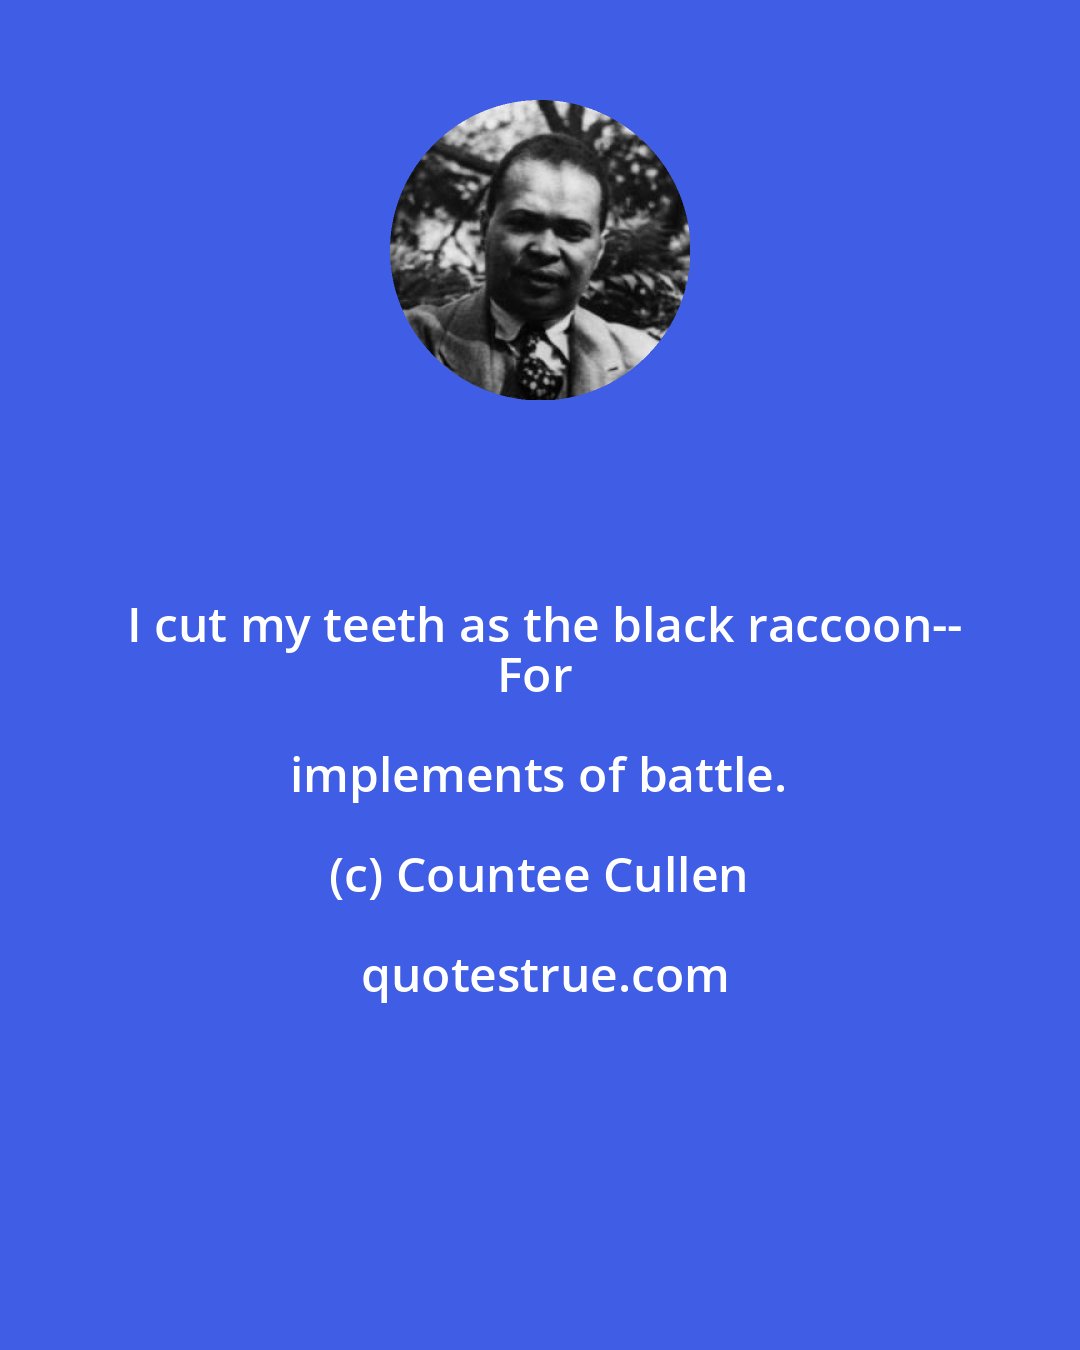 Countee Cullen: I cut my teeth as the black raccoon--
For implements of battle.